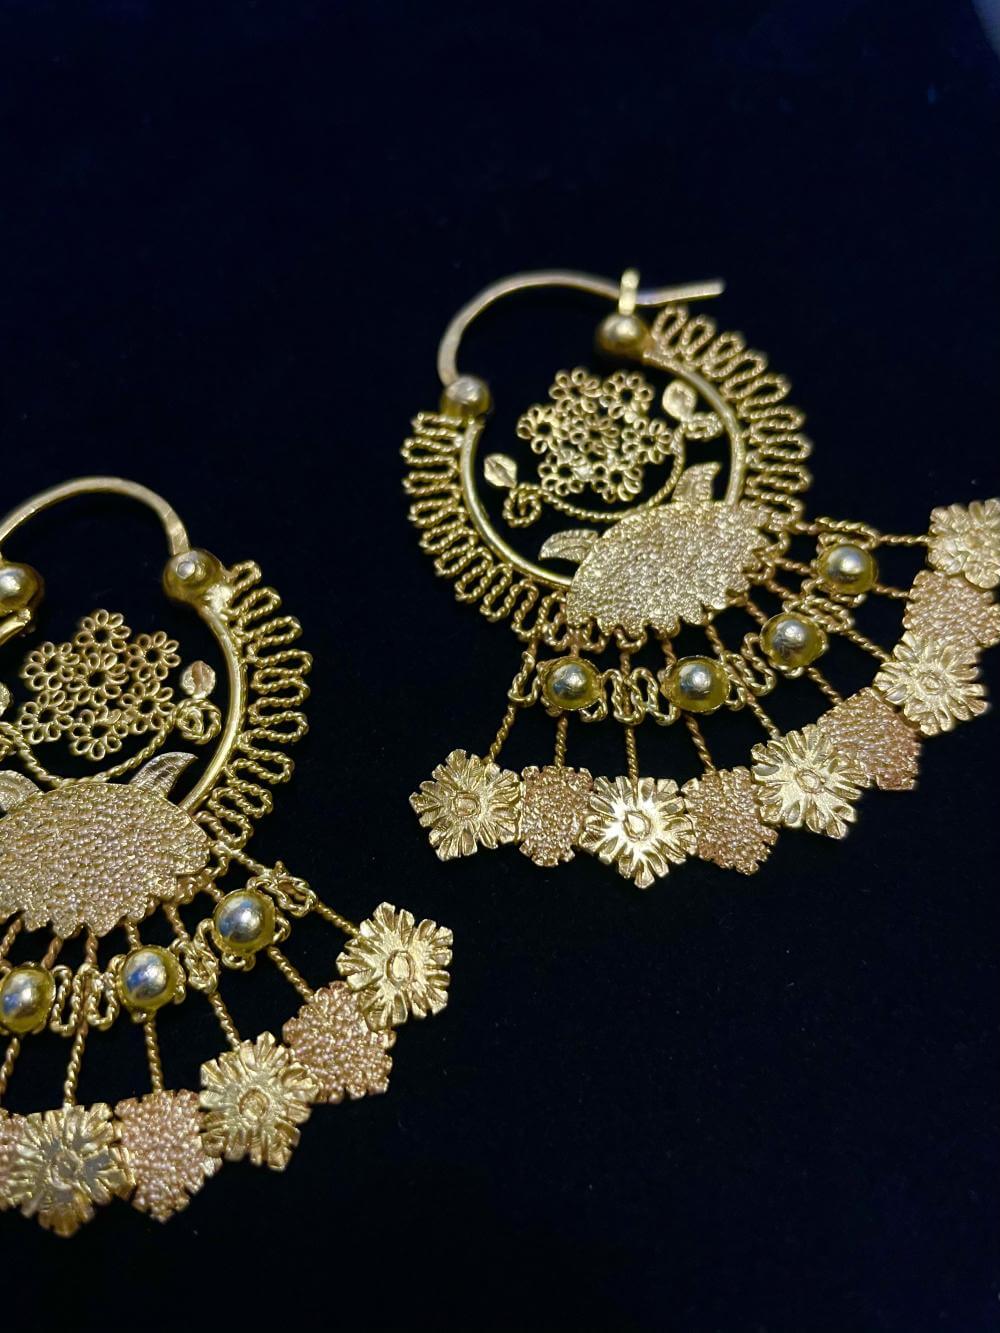 VINTA Gallery Jewelry Collection - Banaba Flower Creolla Earrings